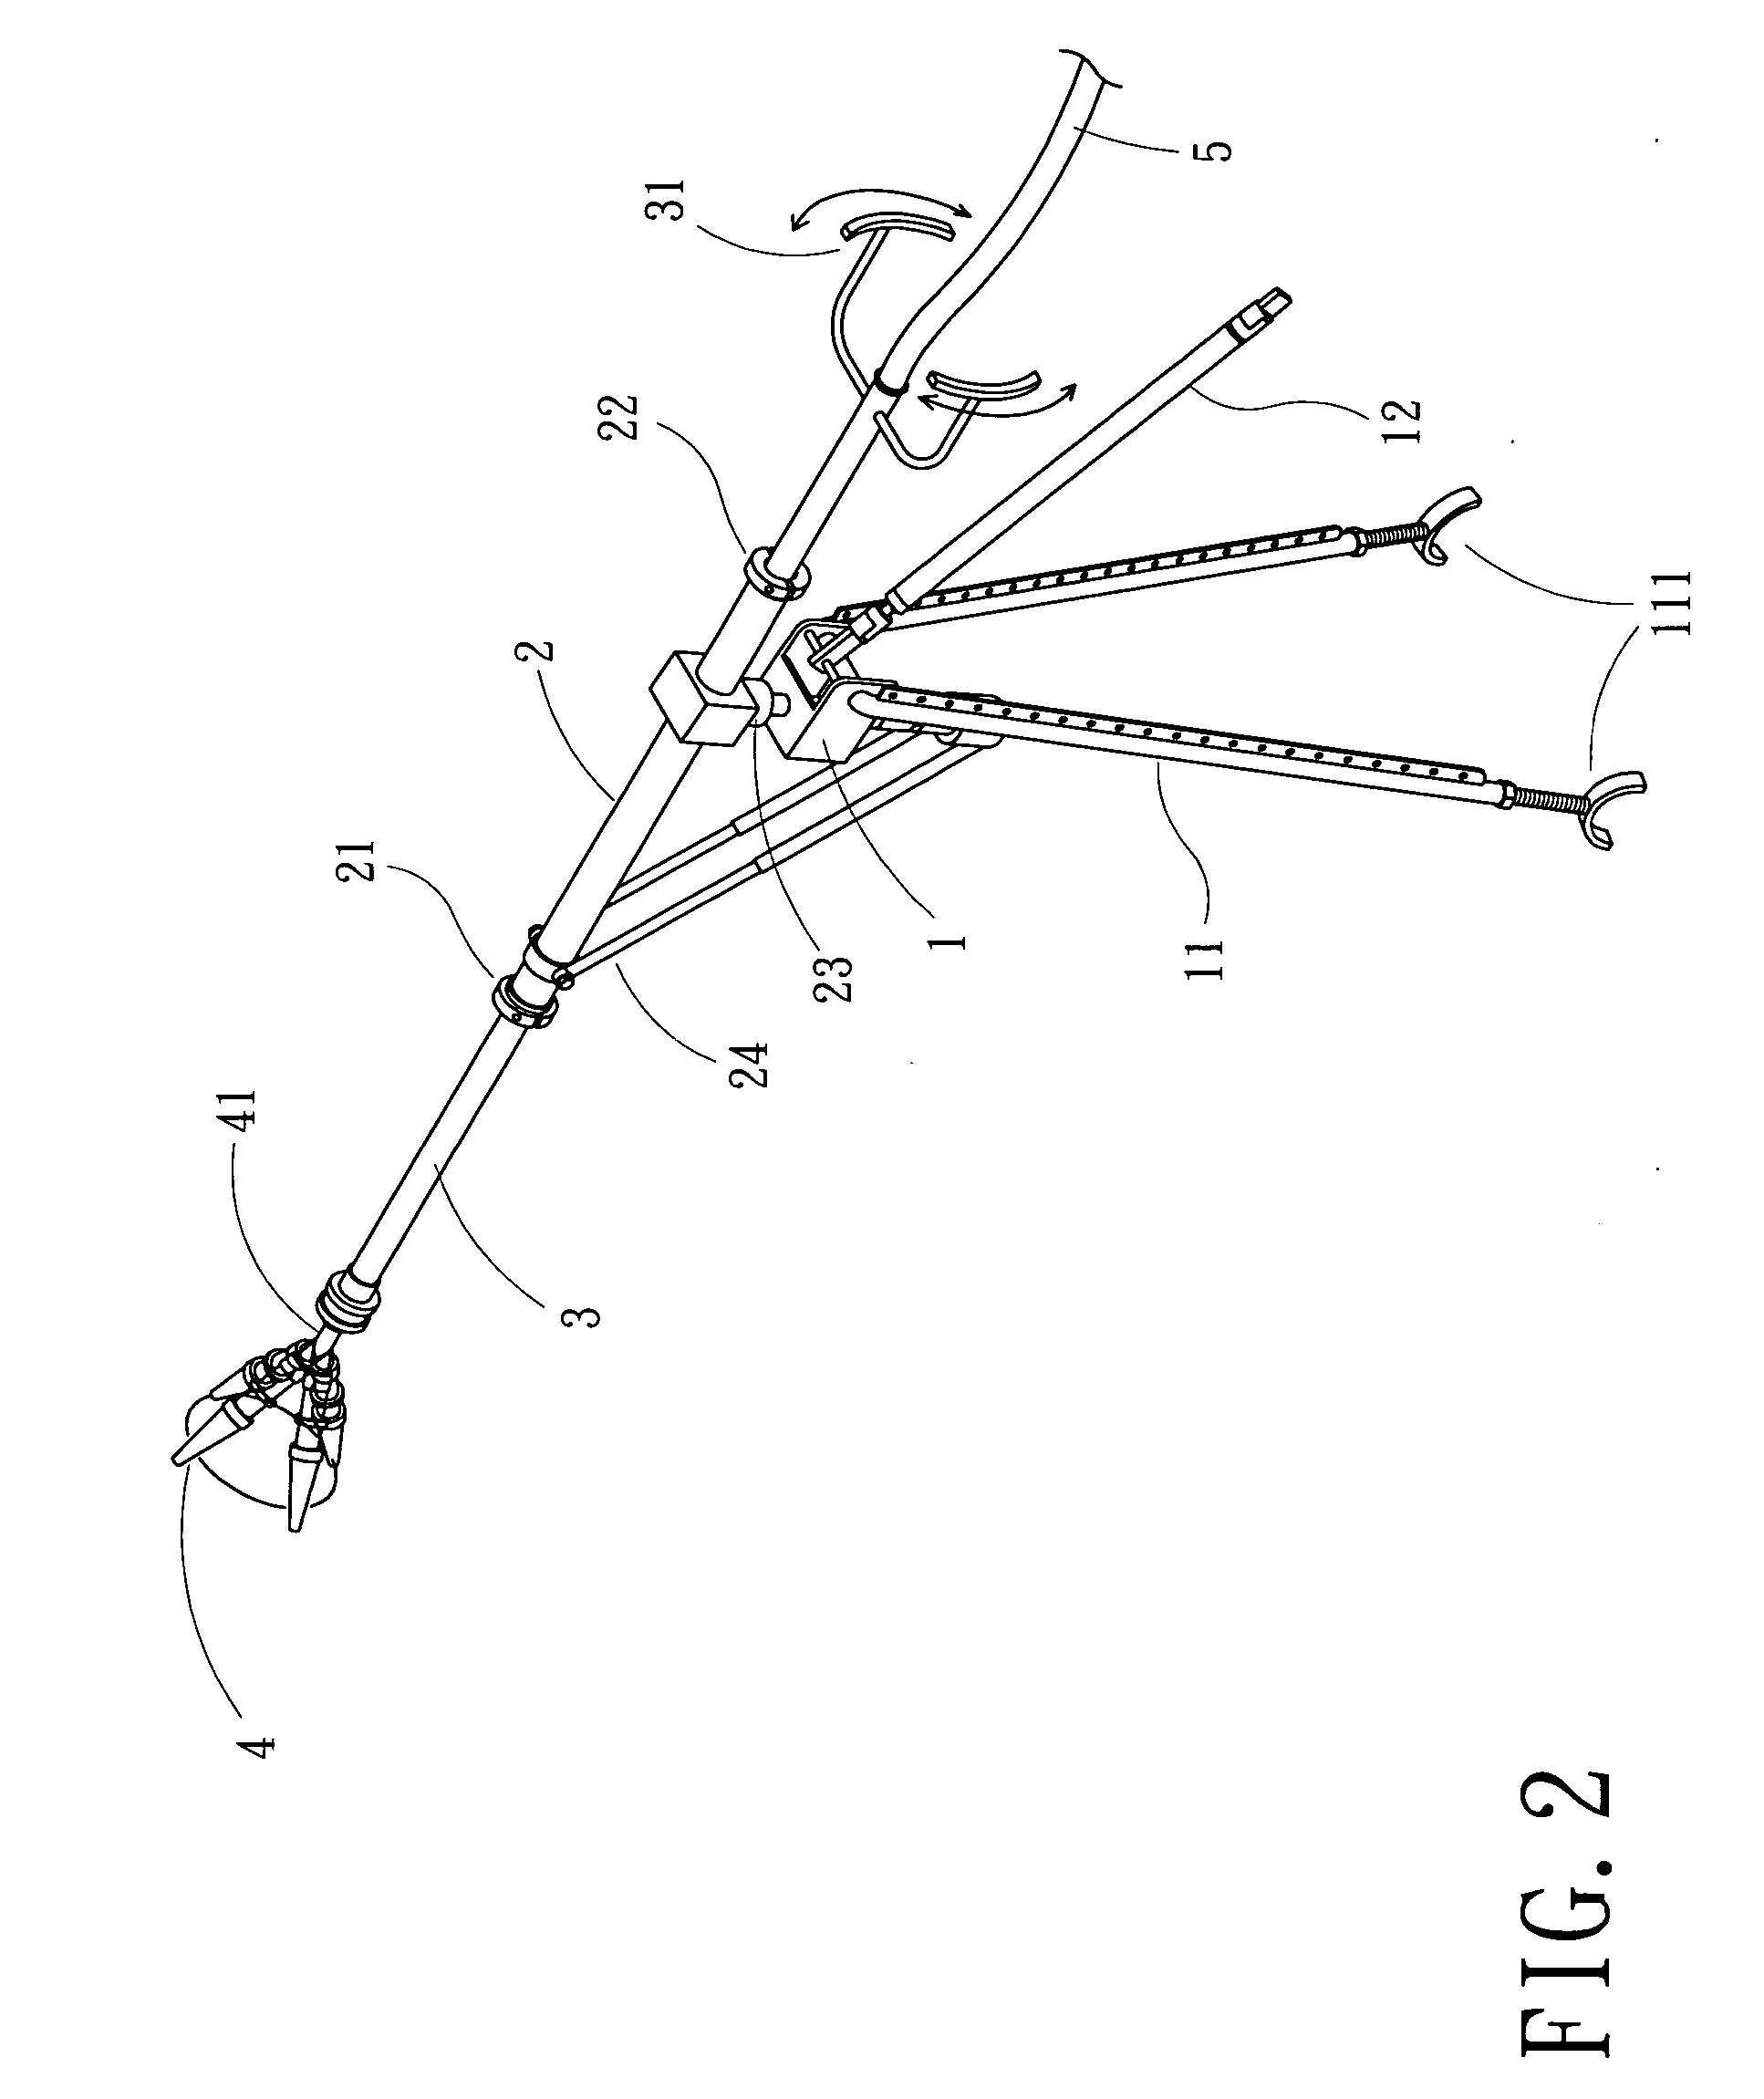 Spray washer structure of insulator used for aircraft